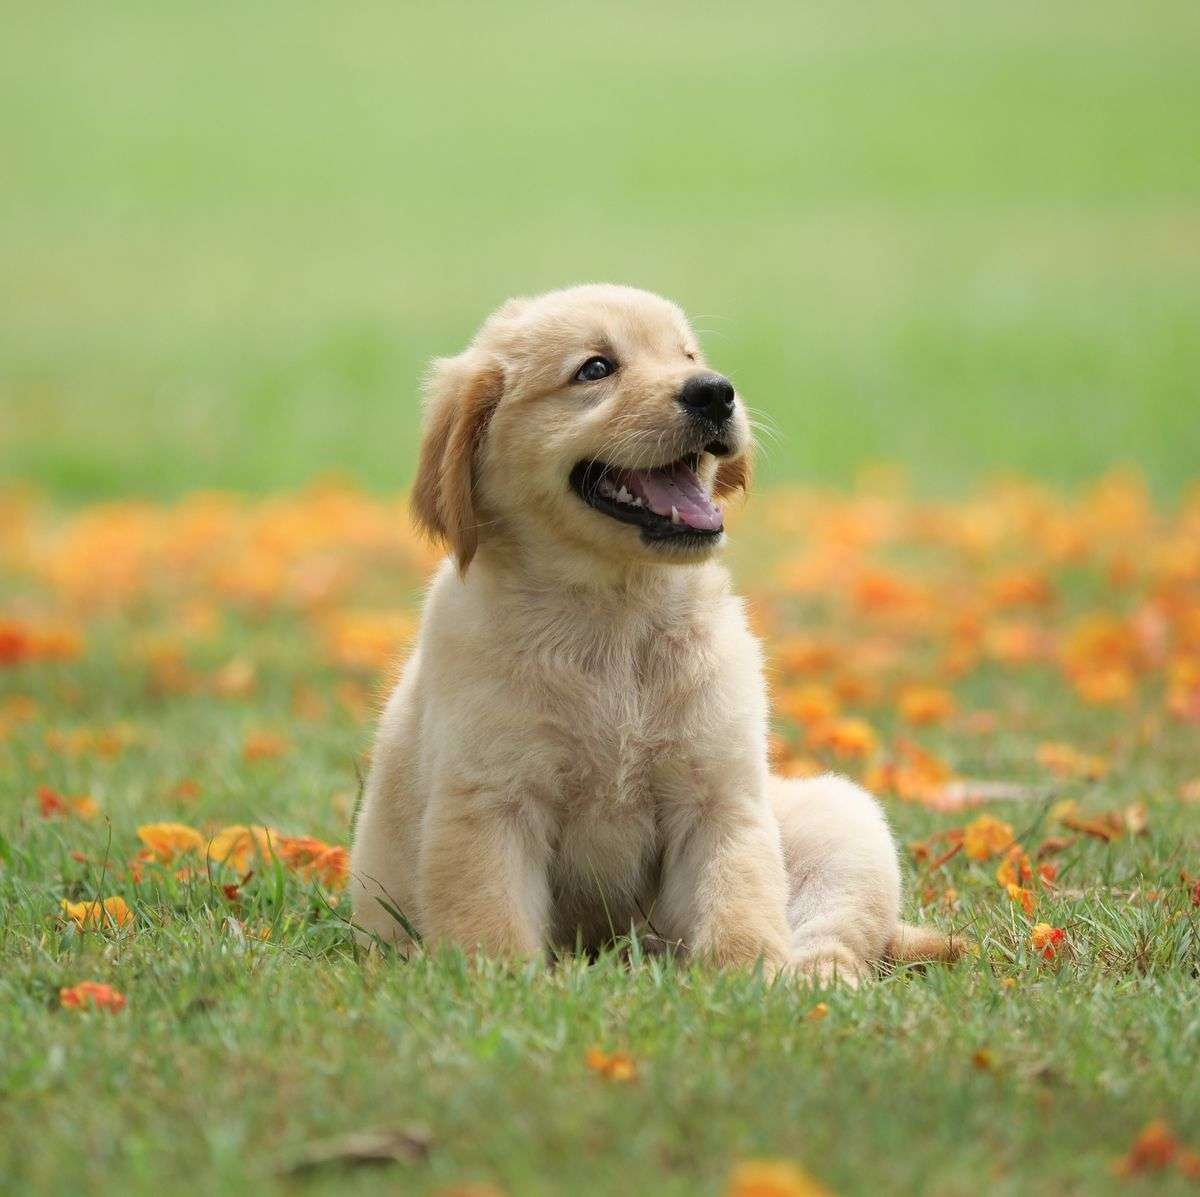 puppy smiling puzzle online from photo